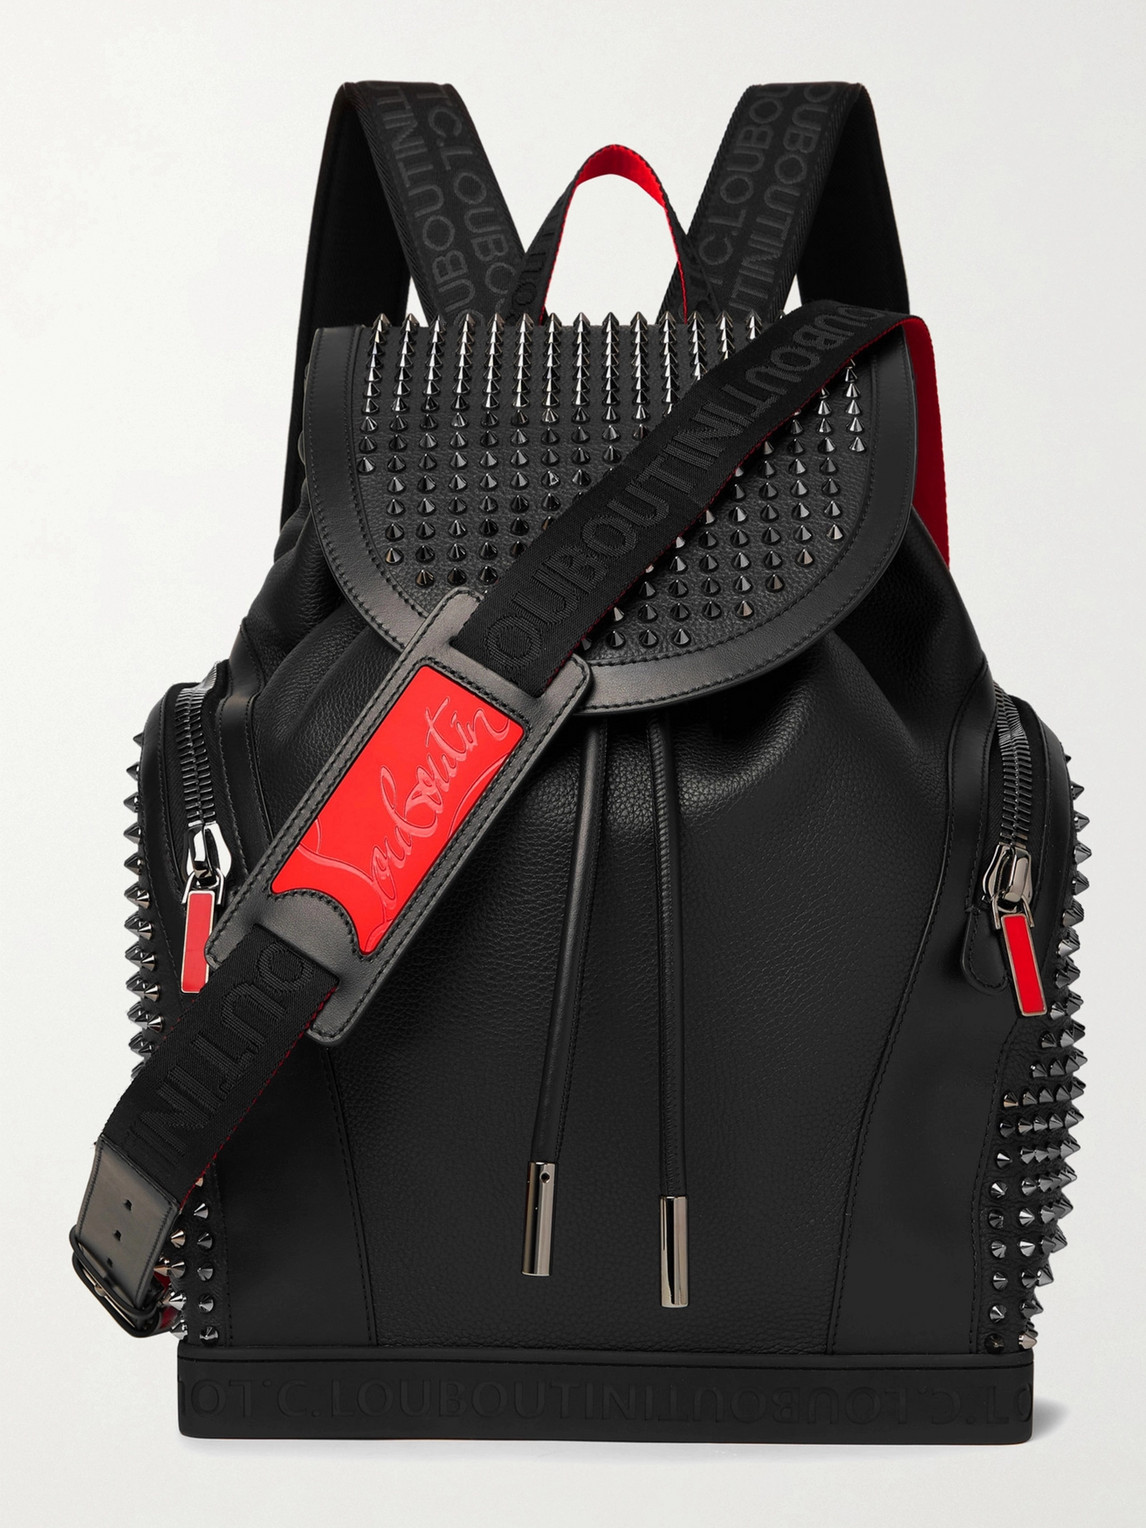 Explorafunk Spiked Rubber-Trimmed Full-Grain Leather Backpack